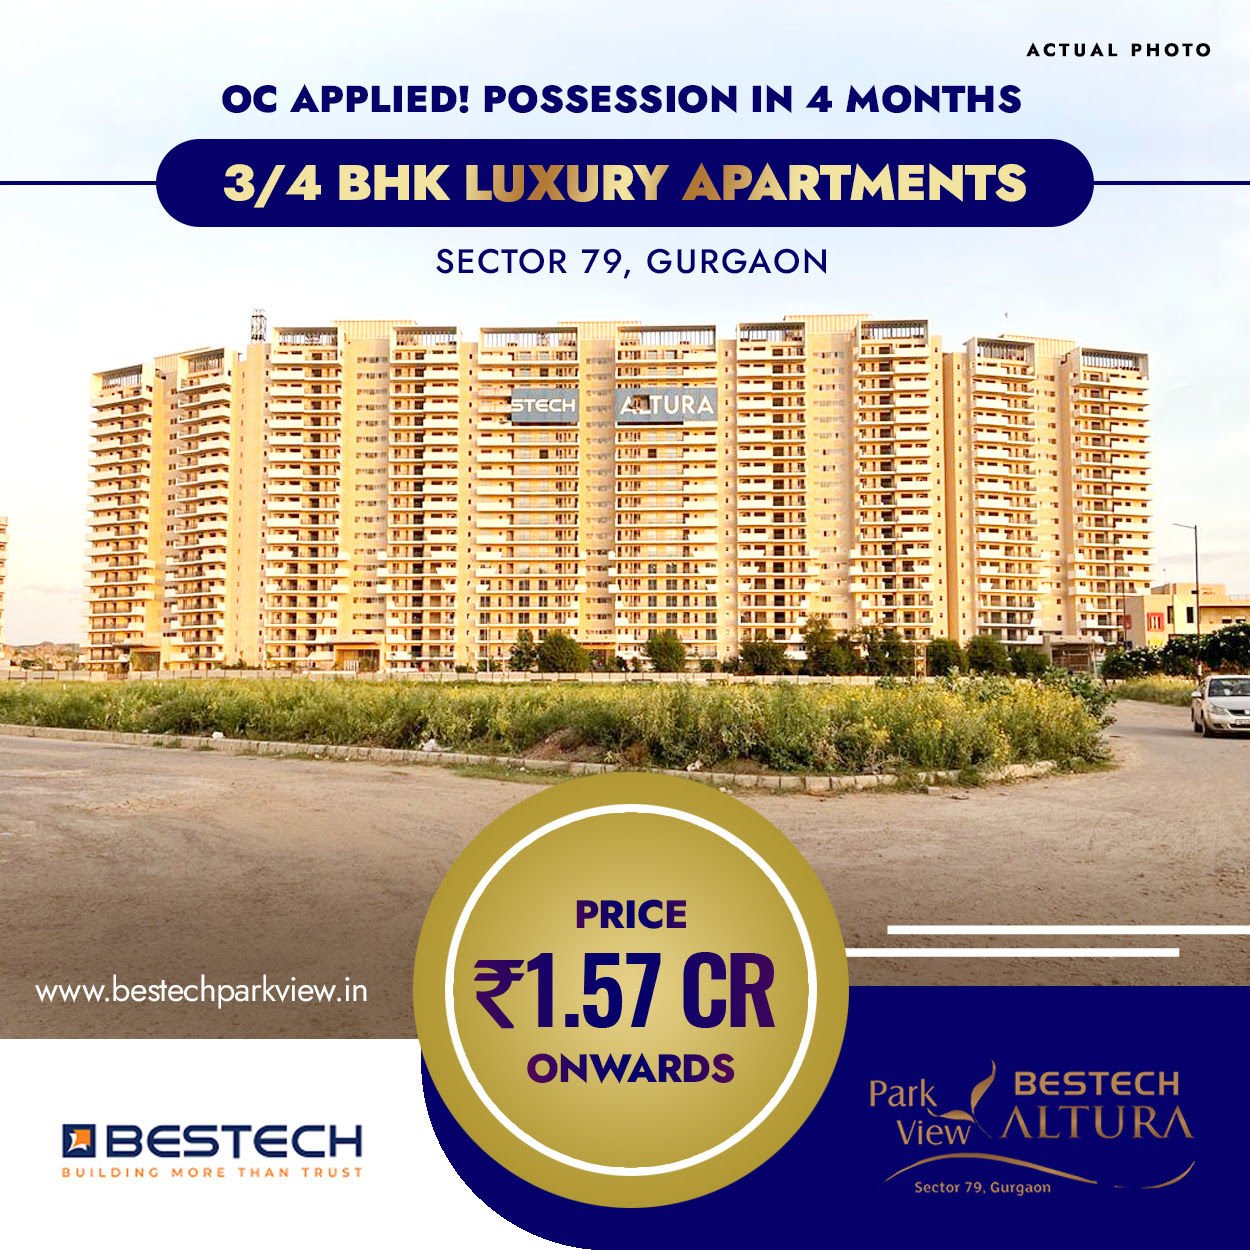 Book 3 & 4 BHK luxury apartments 1.57 Cr onwards at Bestech Altura in Sector 79, Gurgaon Update